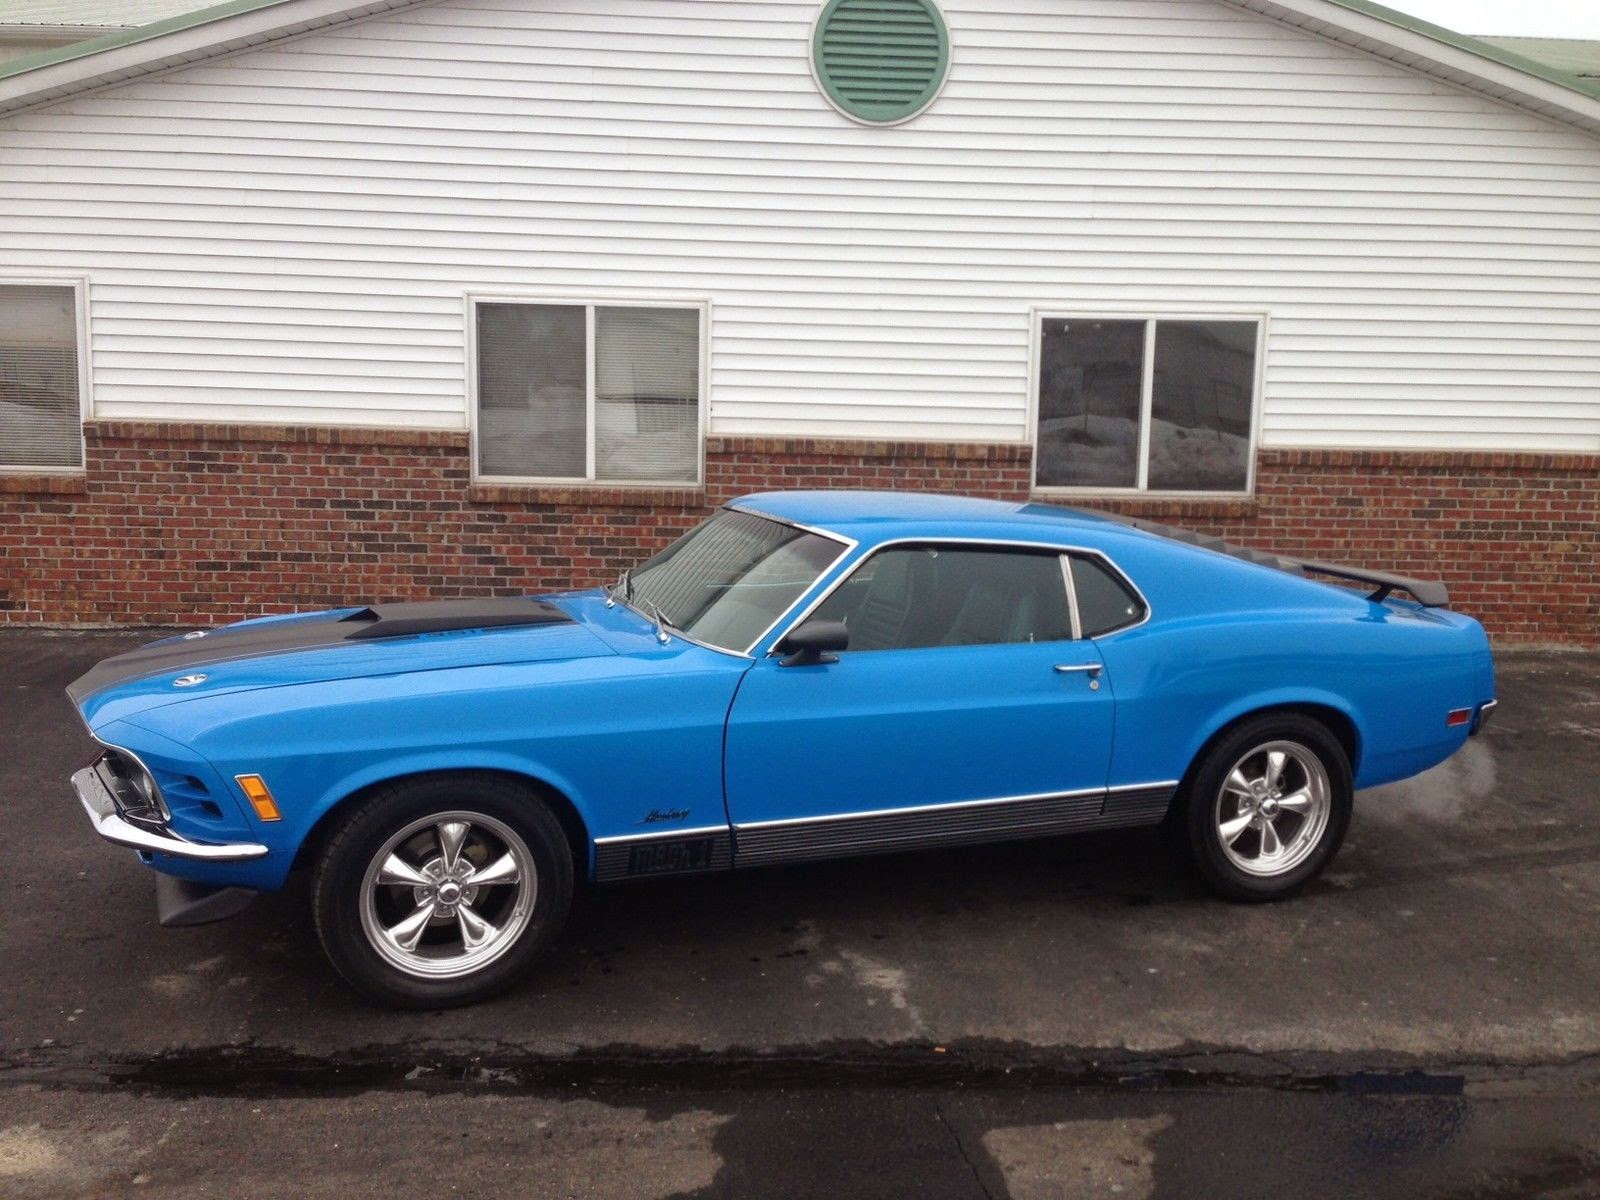 1970 Mustang Mach 1 Rotisserie Restoration ~ For Sale American Muscle Cars